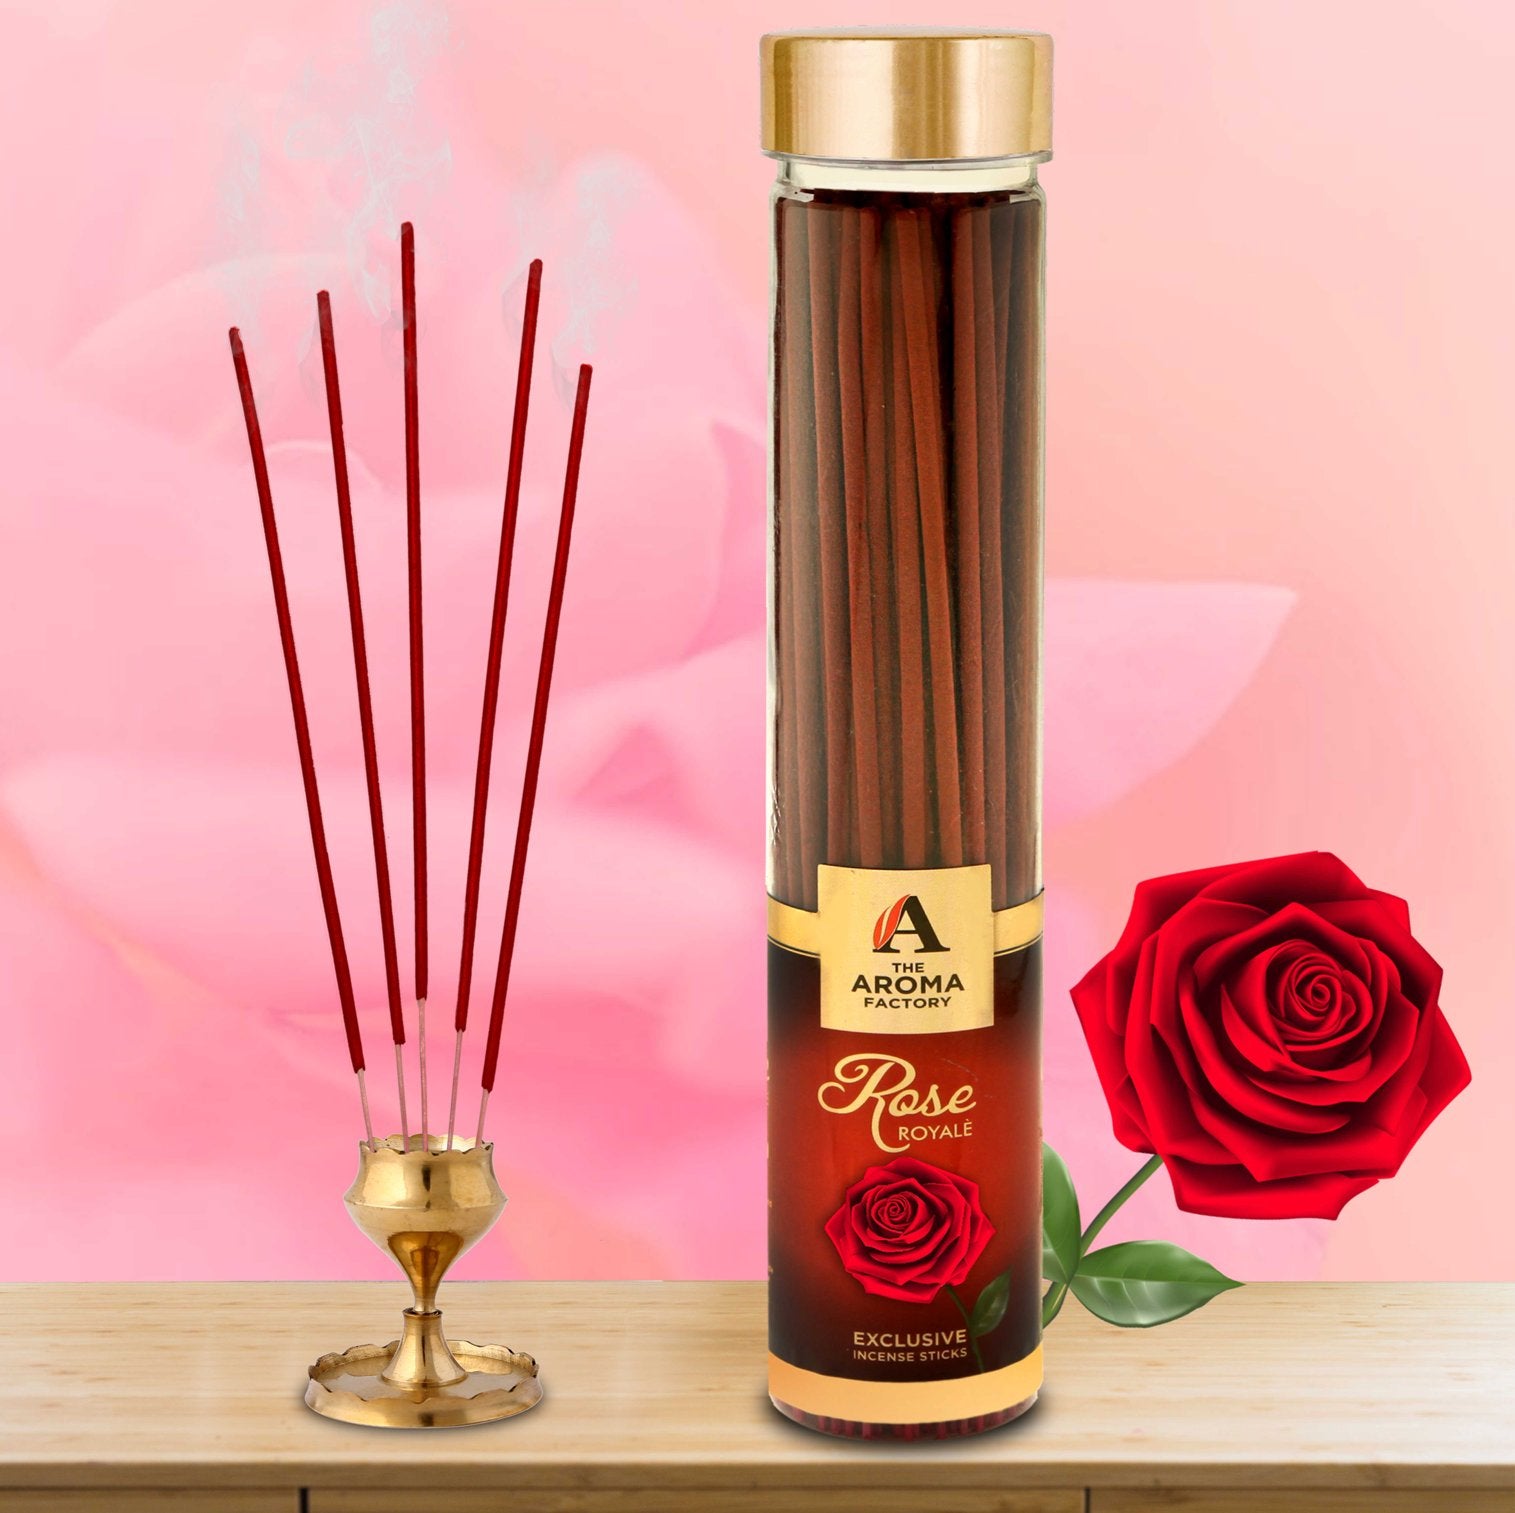 The Aroma Factory Rose Royal Incense Sticks Agarbatti (Charcoal Free & 100% Herbal) Bottle, 100g